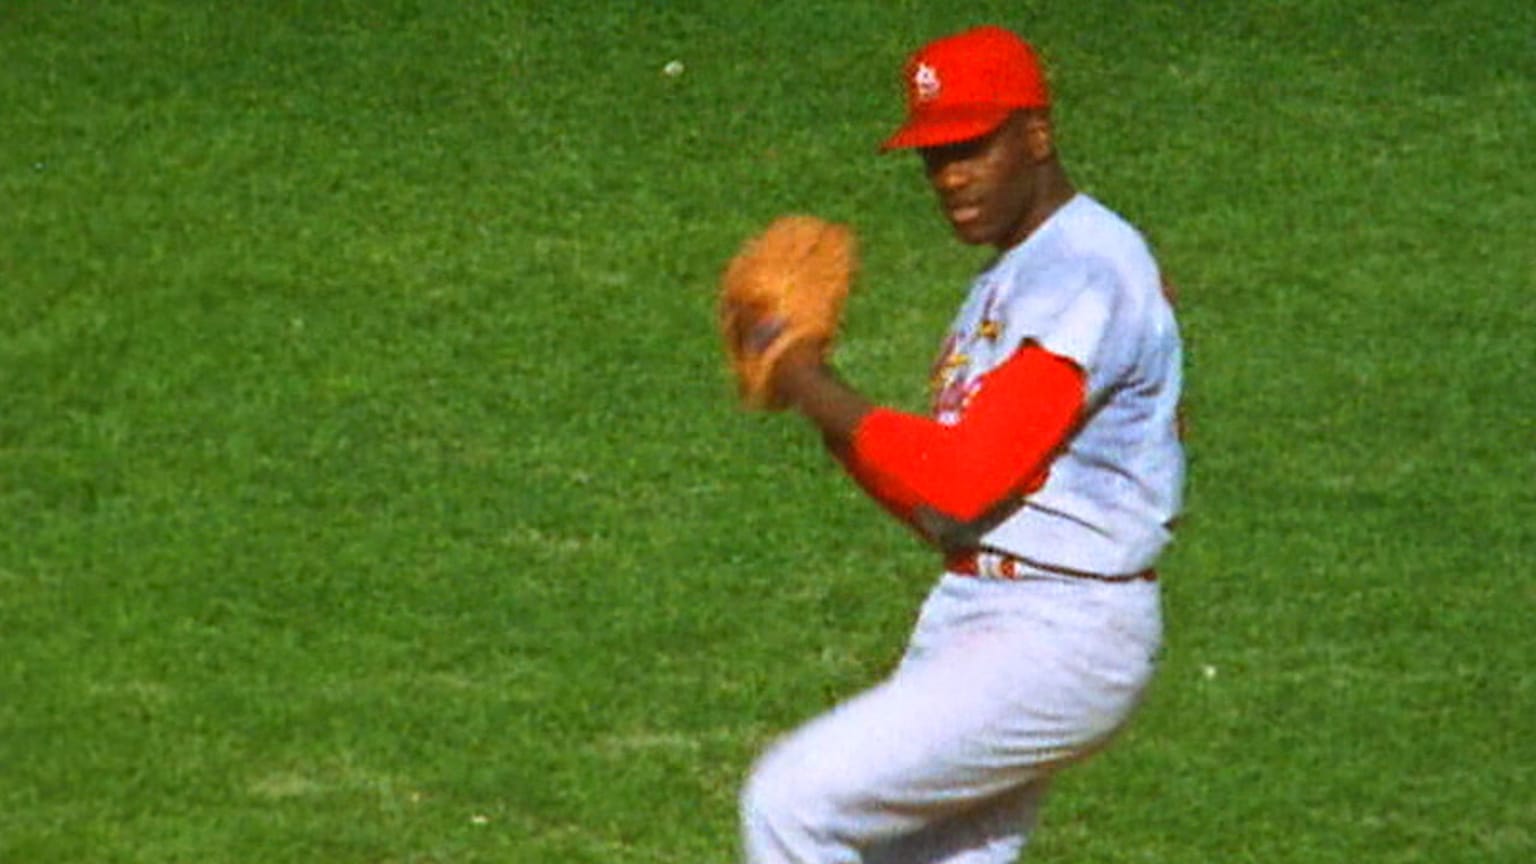 A baseball dream: $5,000 plus meal money and tips from Bob Gibson